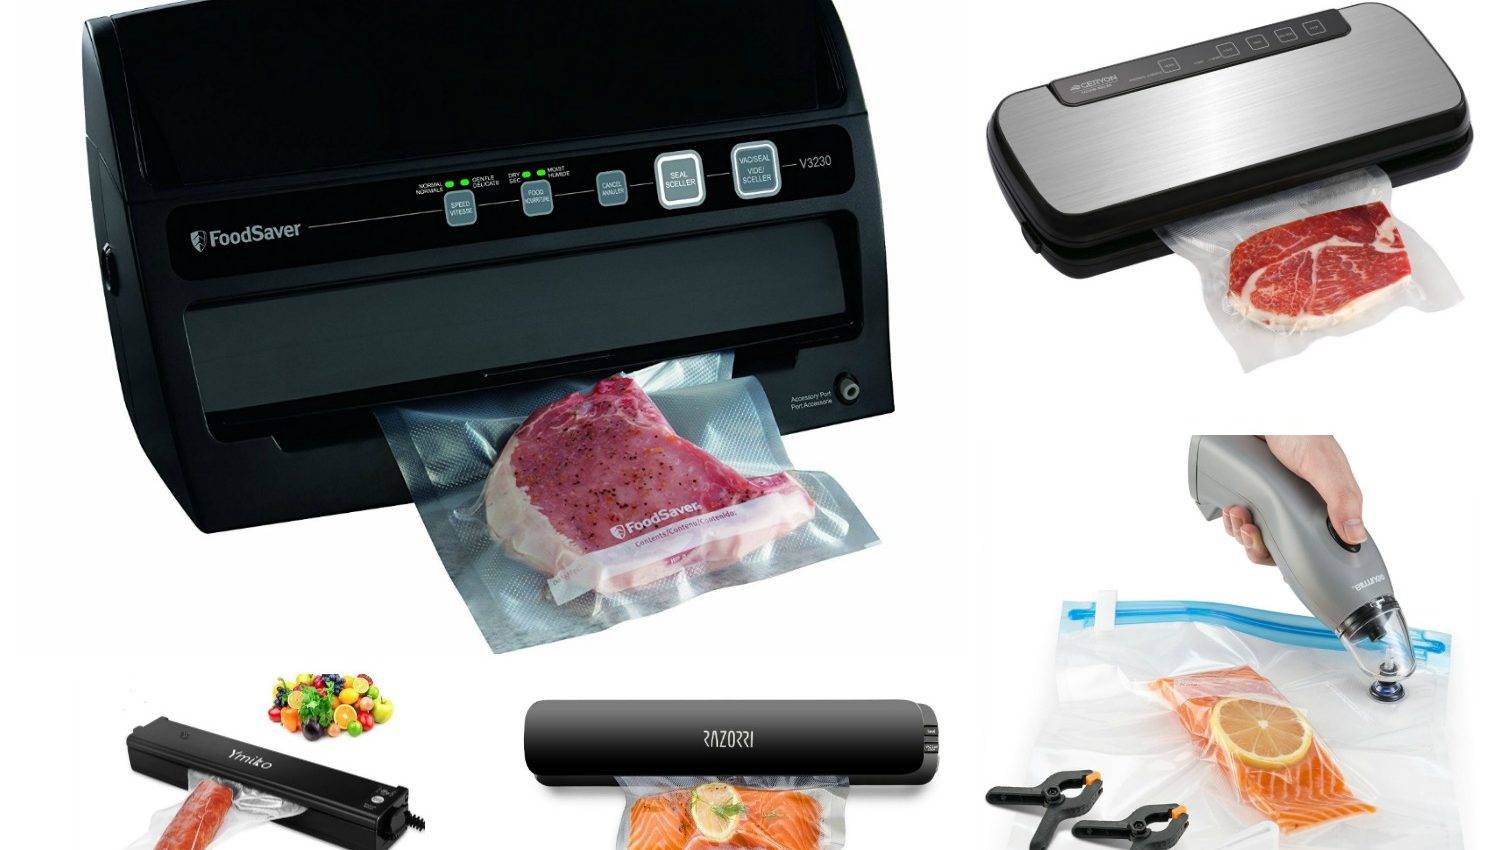 Sous Vide Guy has got your back with five vacuum sealers for budget sous vide!